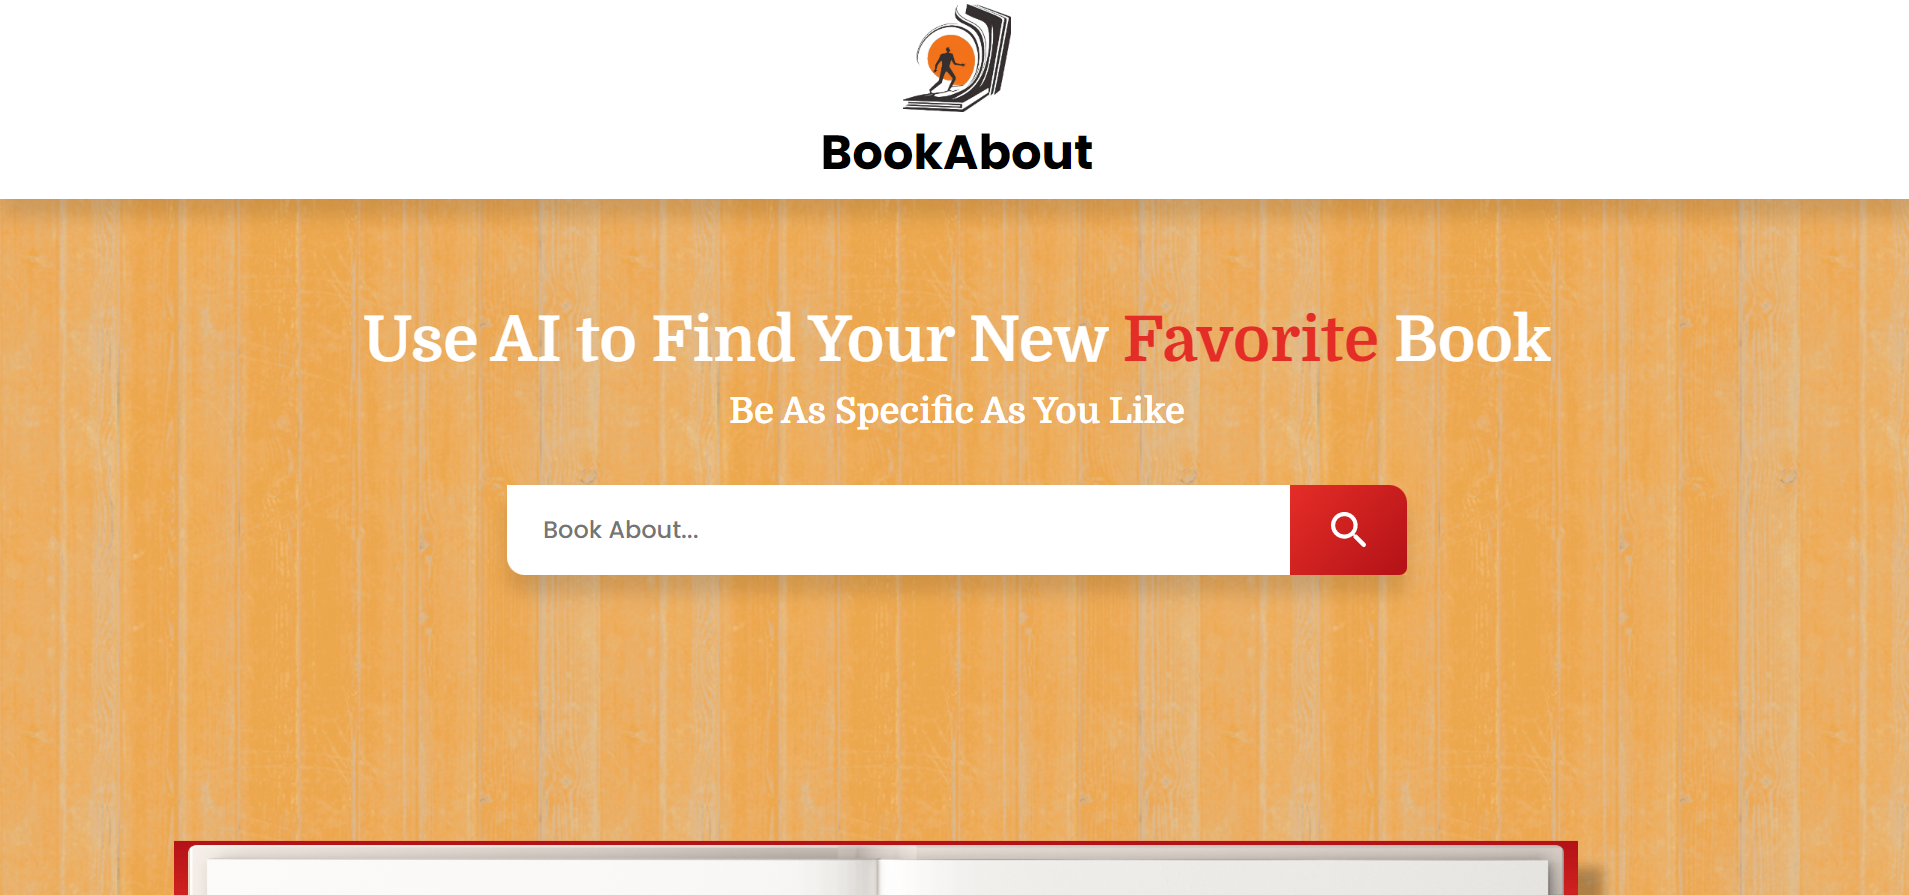 Unlock your next favorite read with Bookabout.io’s AI-powered book search engine